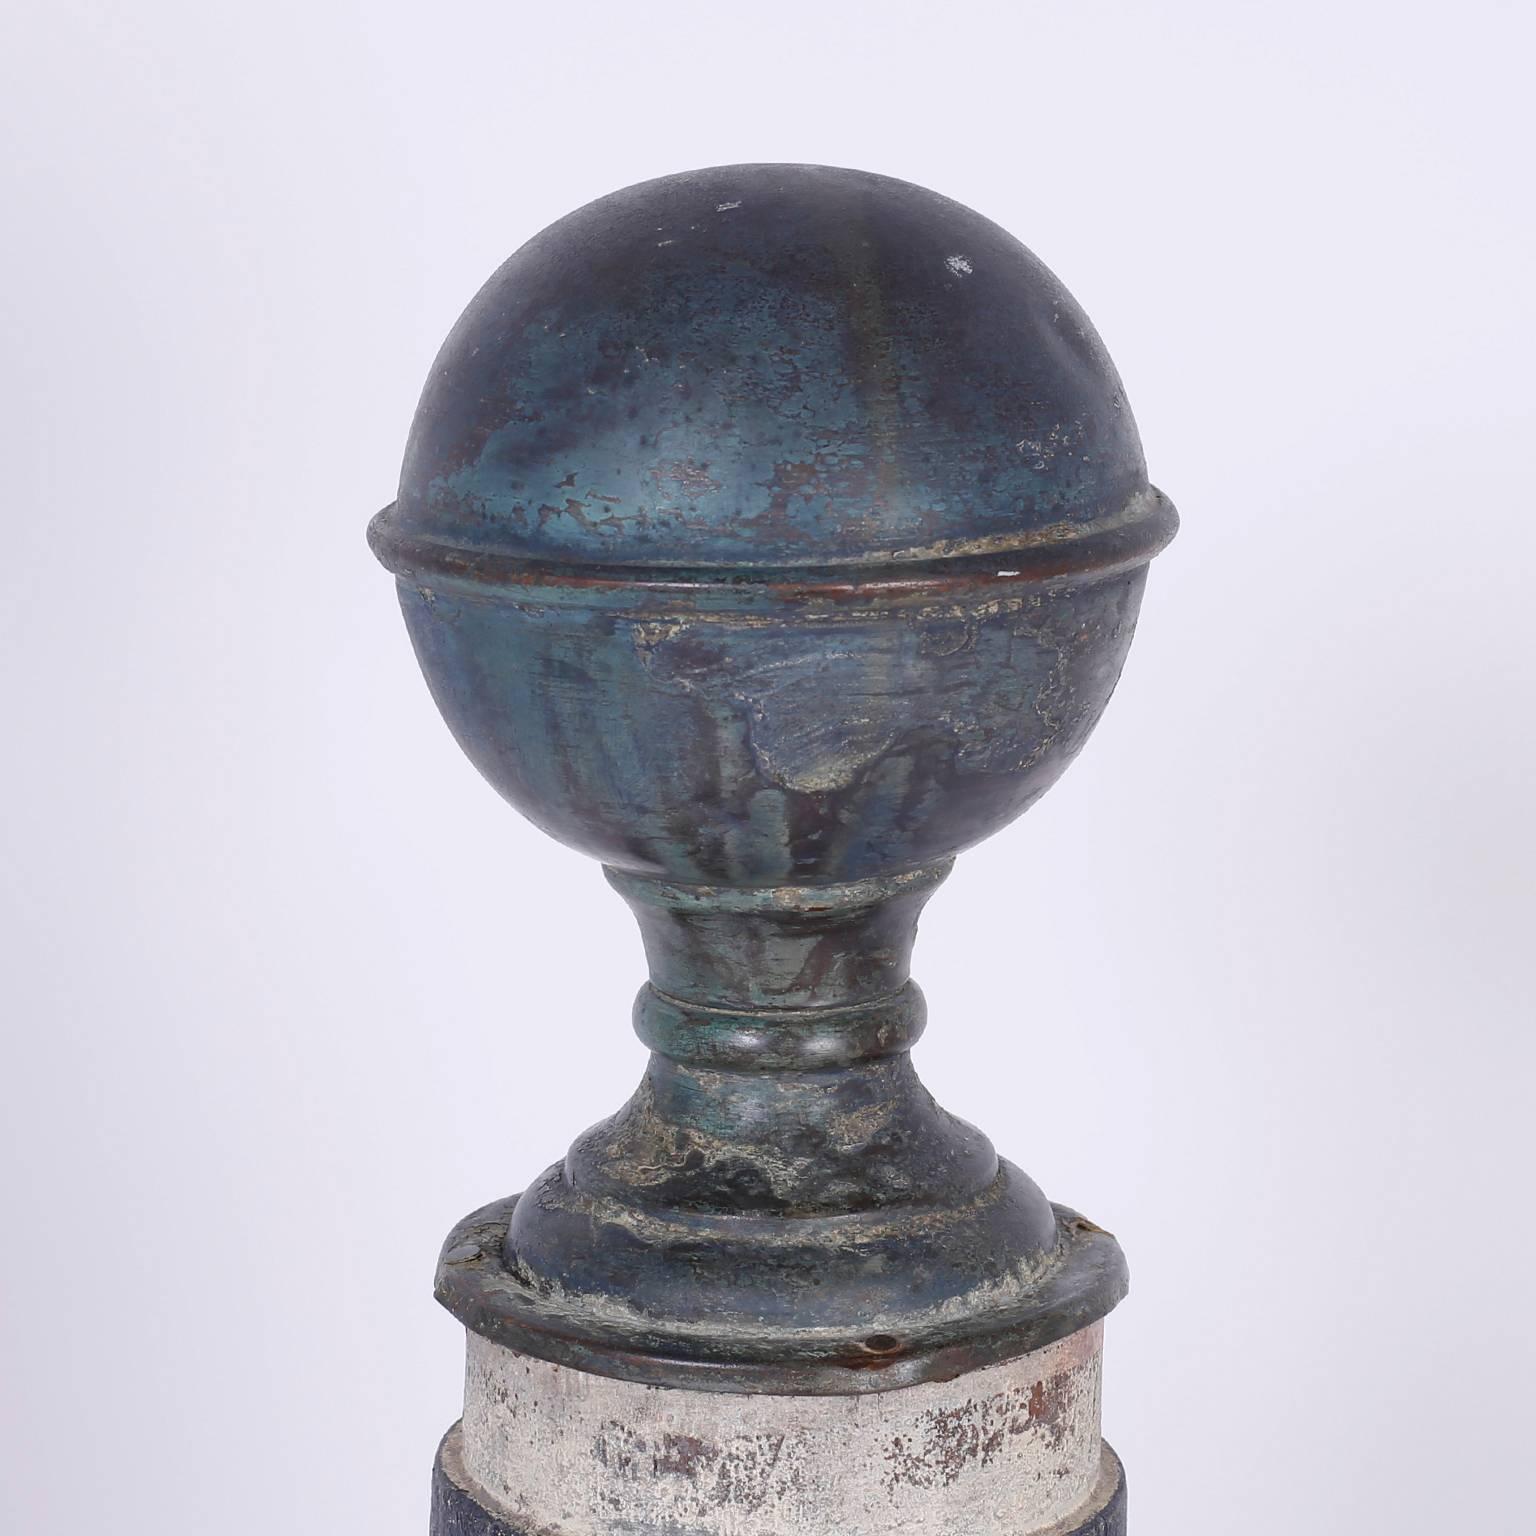 Folky barber's pole with Classic architectural form, topped with a brass ball on stand that has acquired an alluring patina. The shaft is a tapered cylinder on a rectangular plinth. This rare object has retained its original red white and blue, now